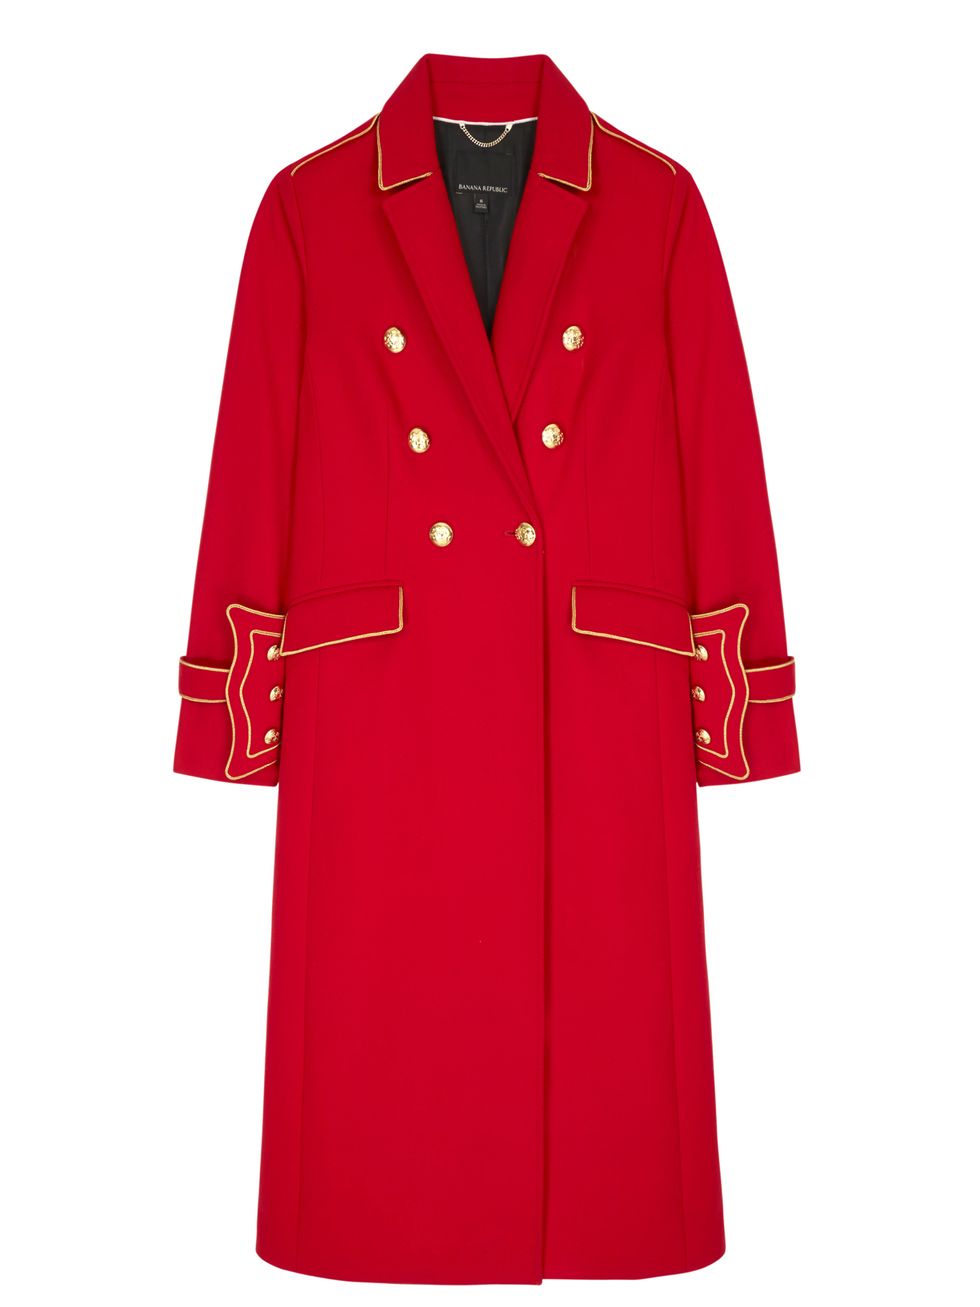 Clothing, Coat, Overcoat, Outerwear, Red, Trench coat, Sleeve, Robe, Frock coat, Day dress, 